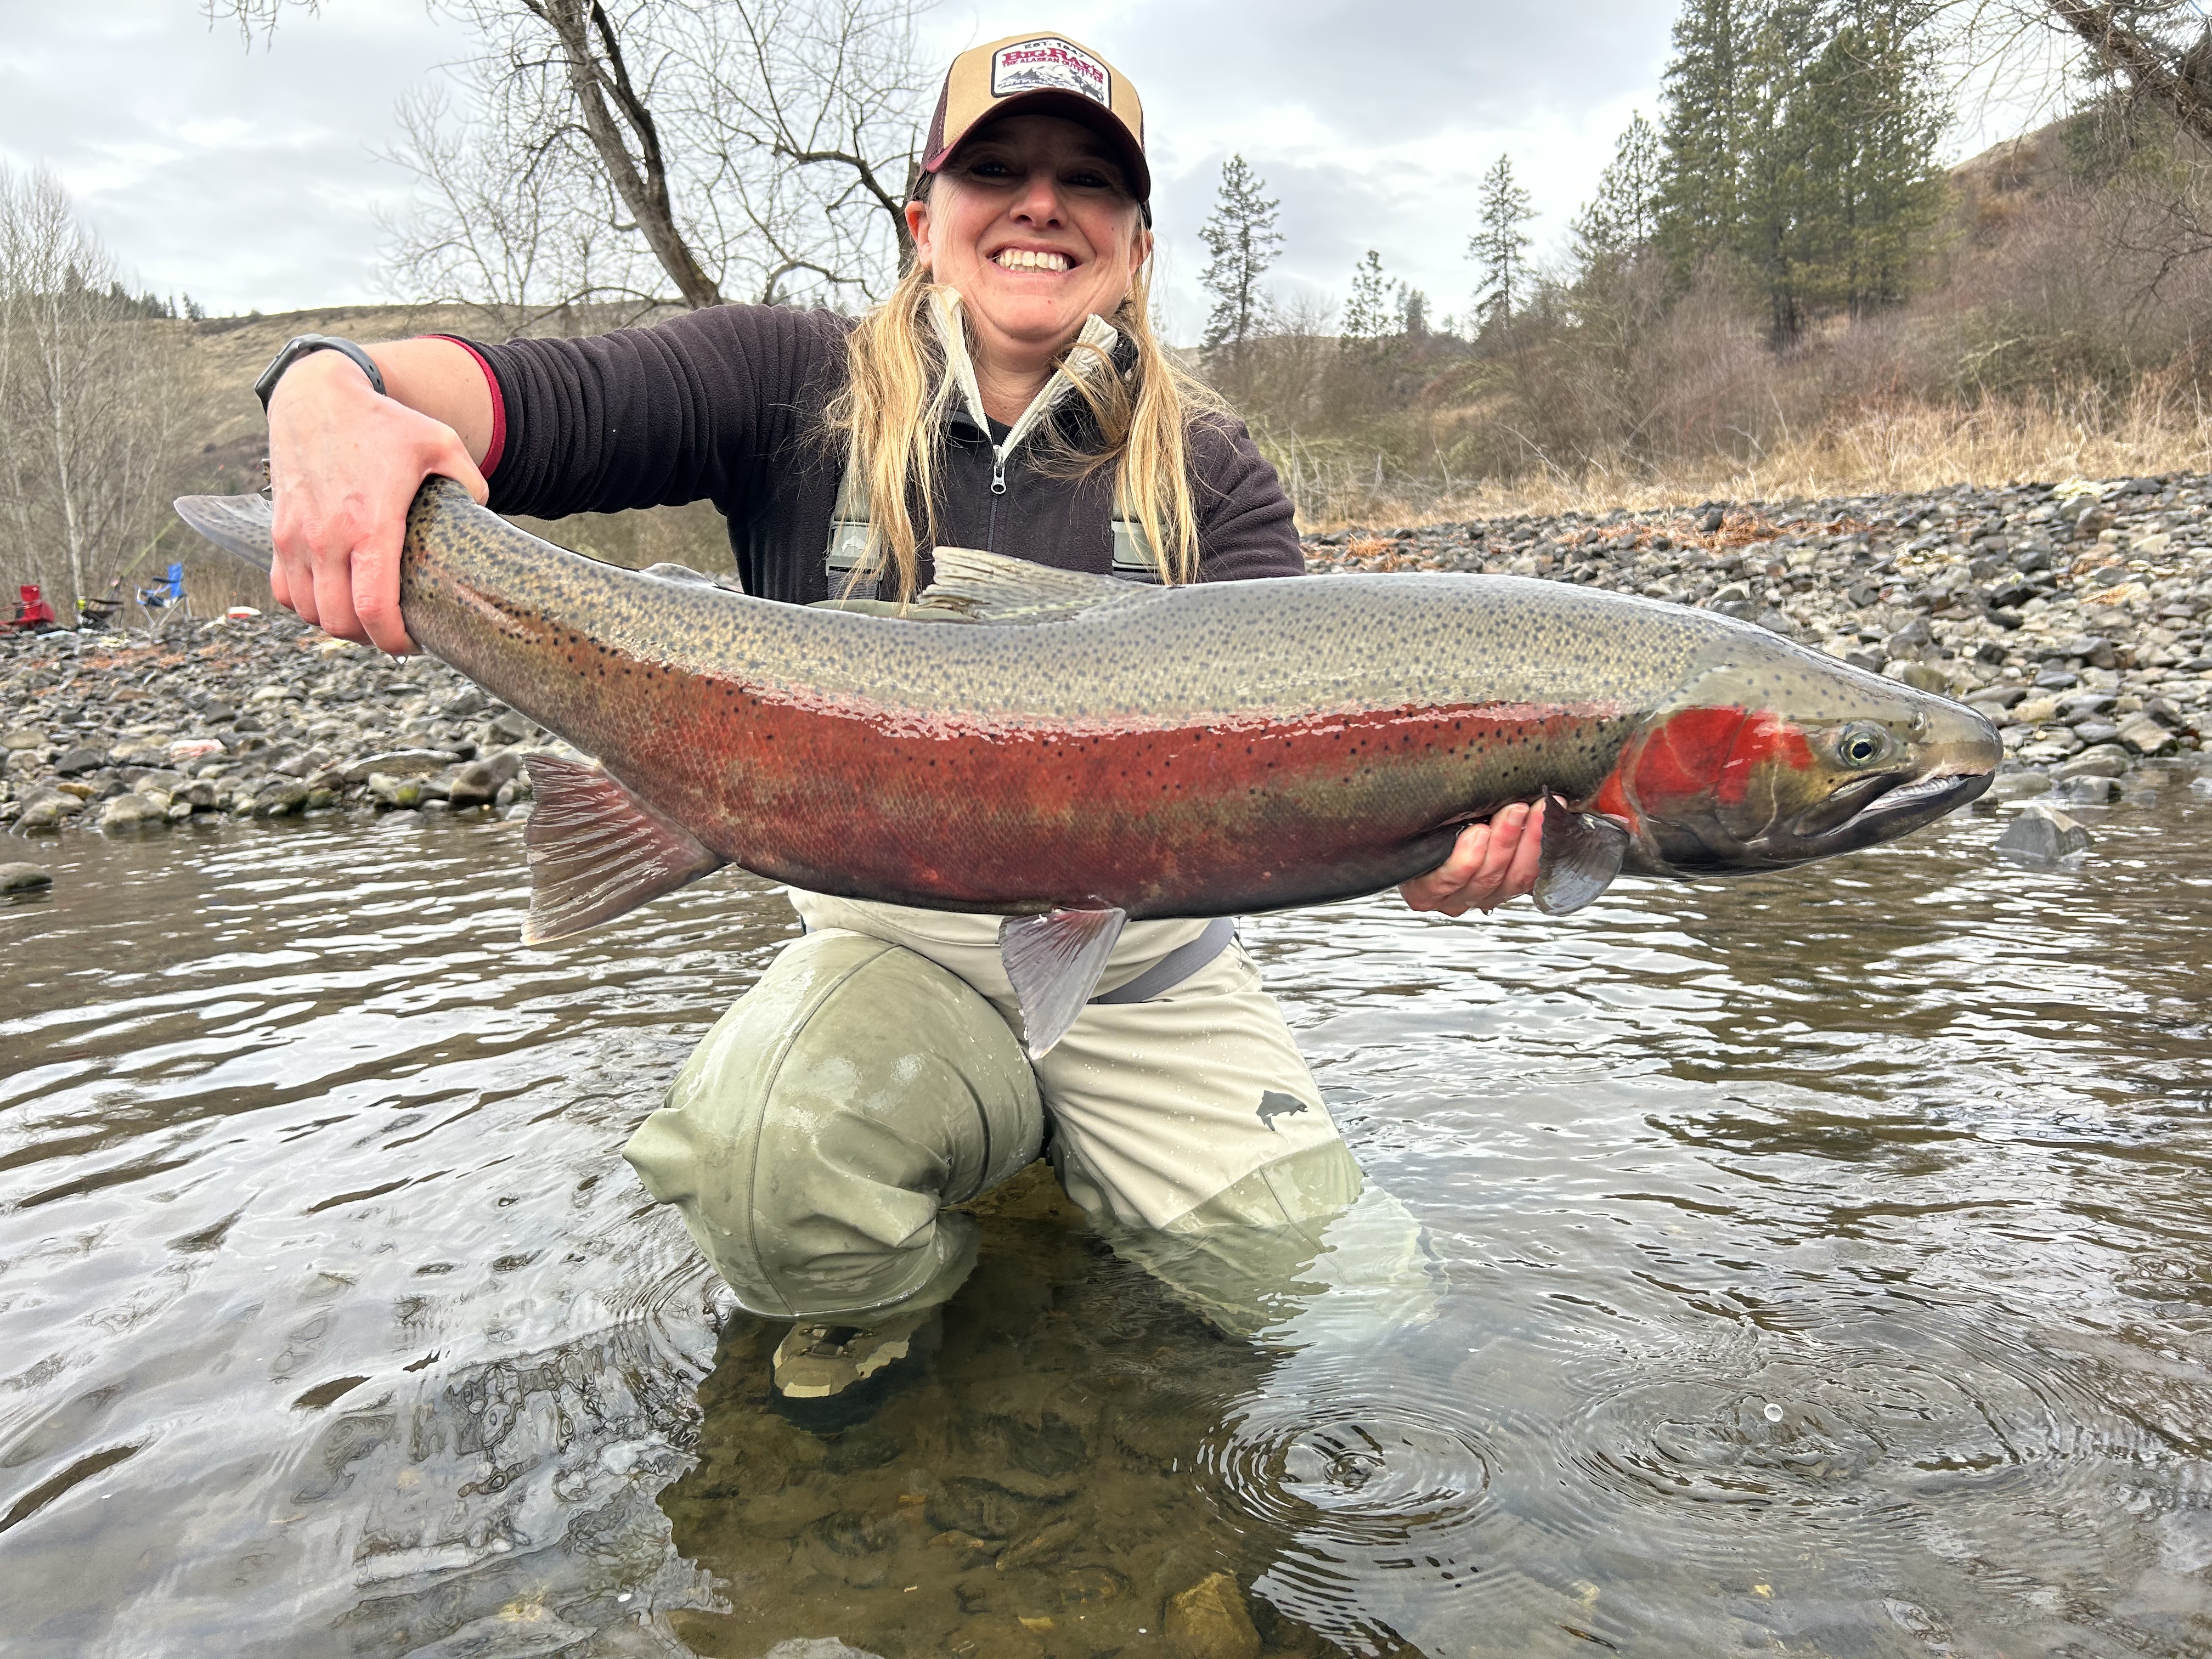 Female angler crouches down while holding a large steelhead